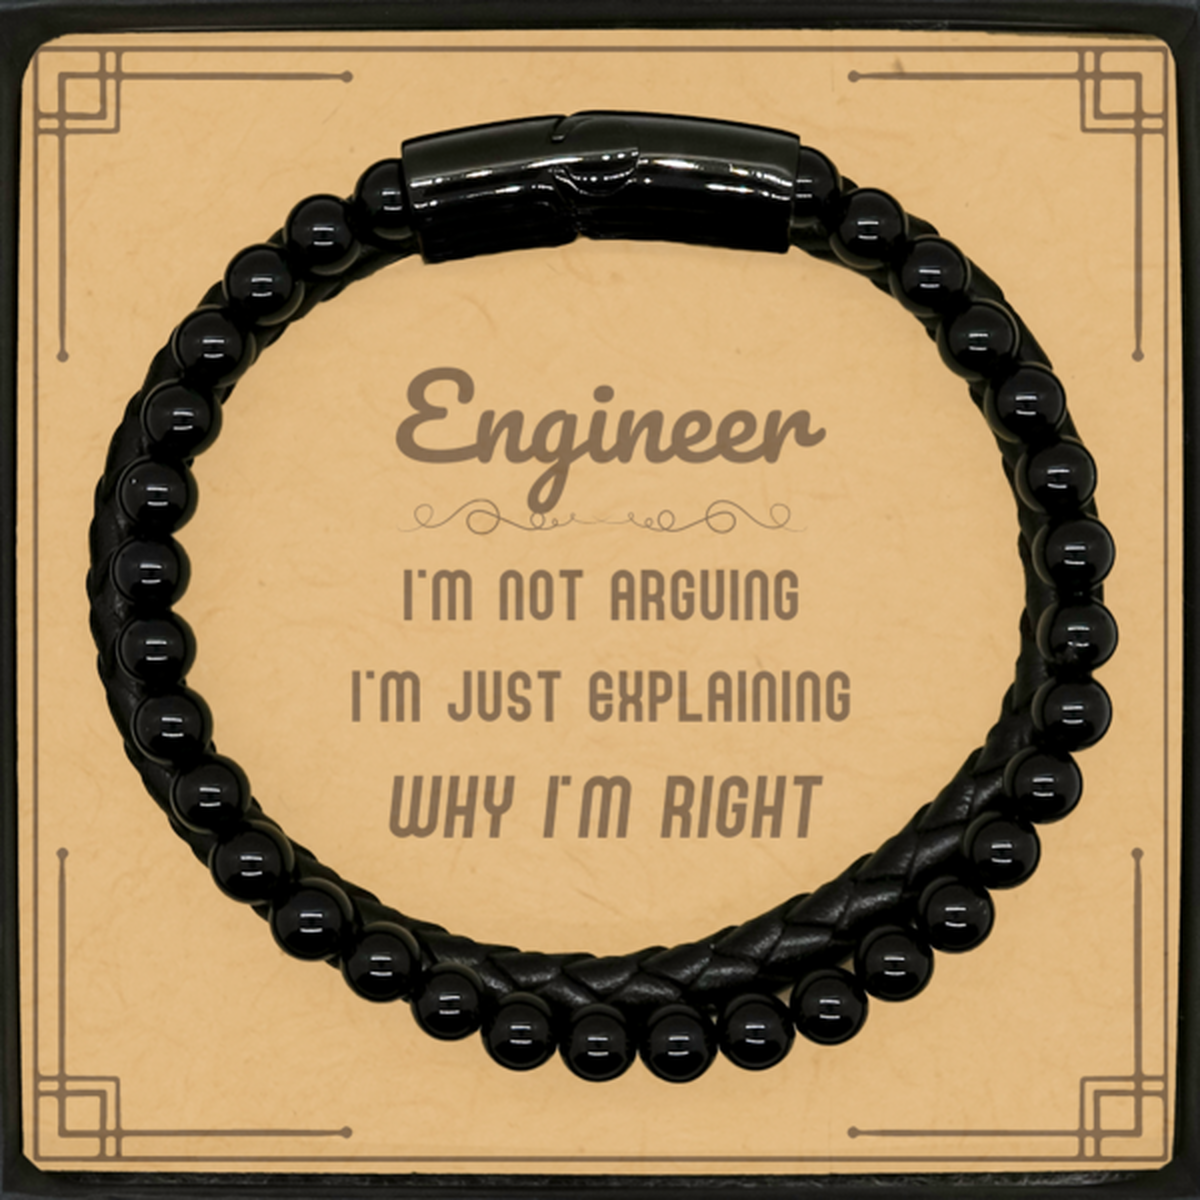 Engineer I'm not Arguing. I'm Just Explaining Why I'm RIGHT Stone Leather Bracelets, Funny Saying Quote Engineer Gifts For Engineer Message Card Graduation Birthday Christmas Gifts for Men Women Coworker